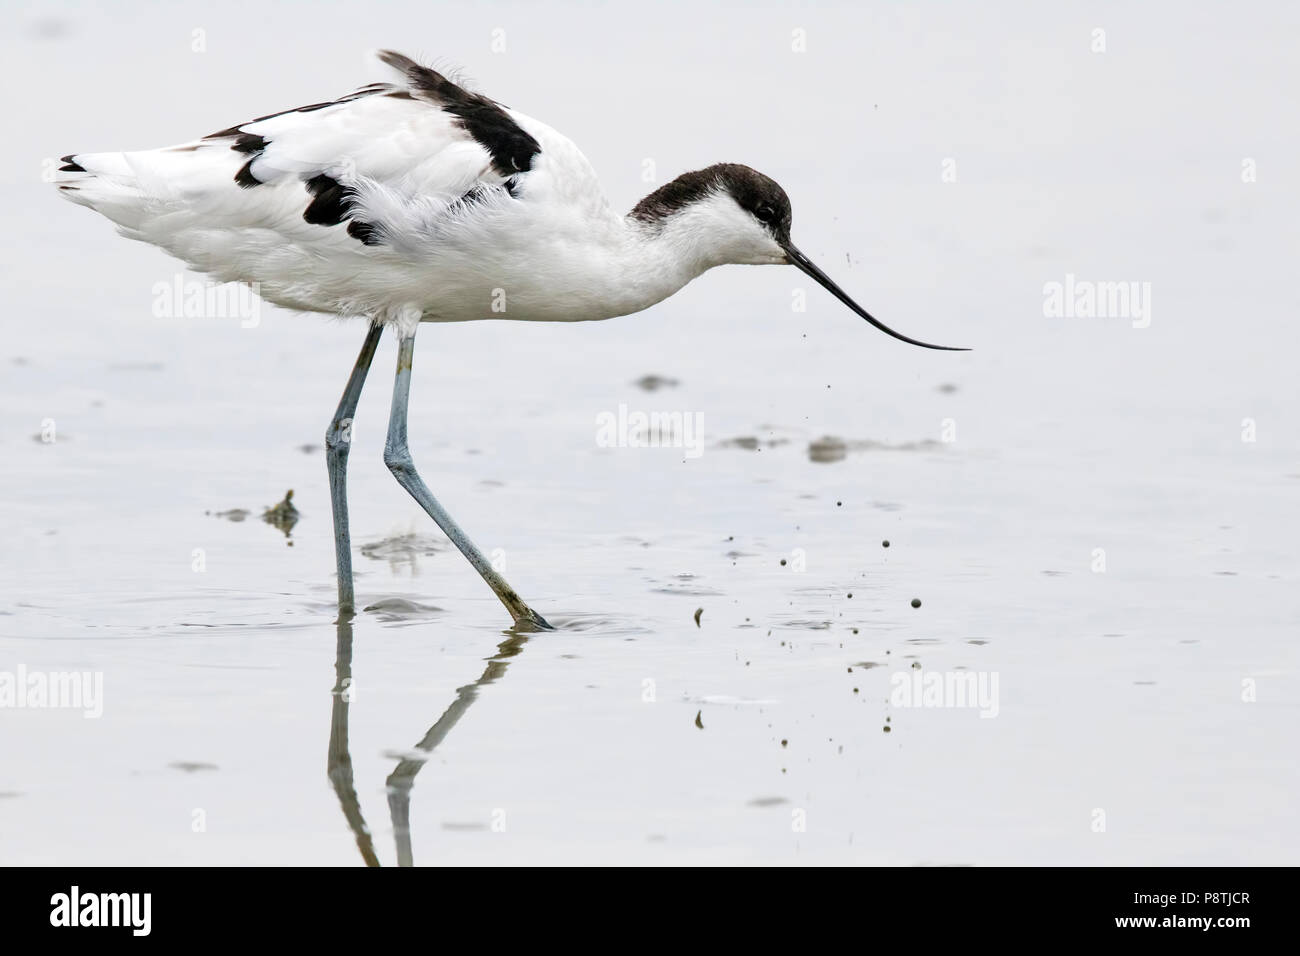 Large detailed profile shot of an Avocet wading in mud Stock Photo